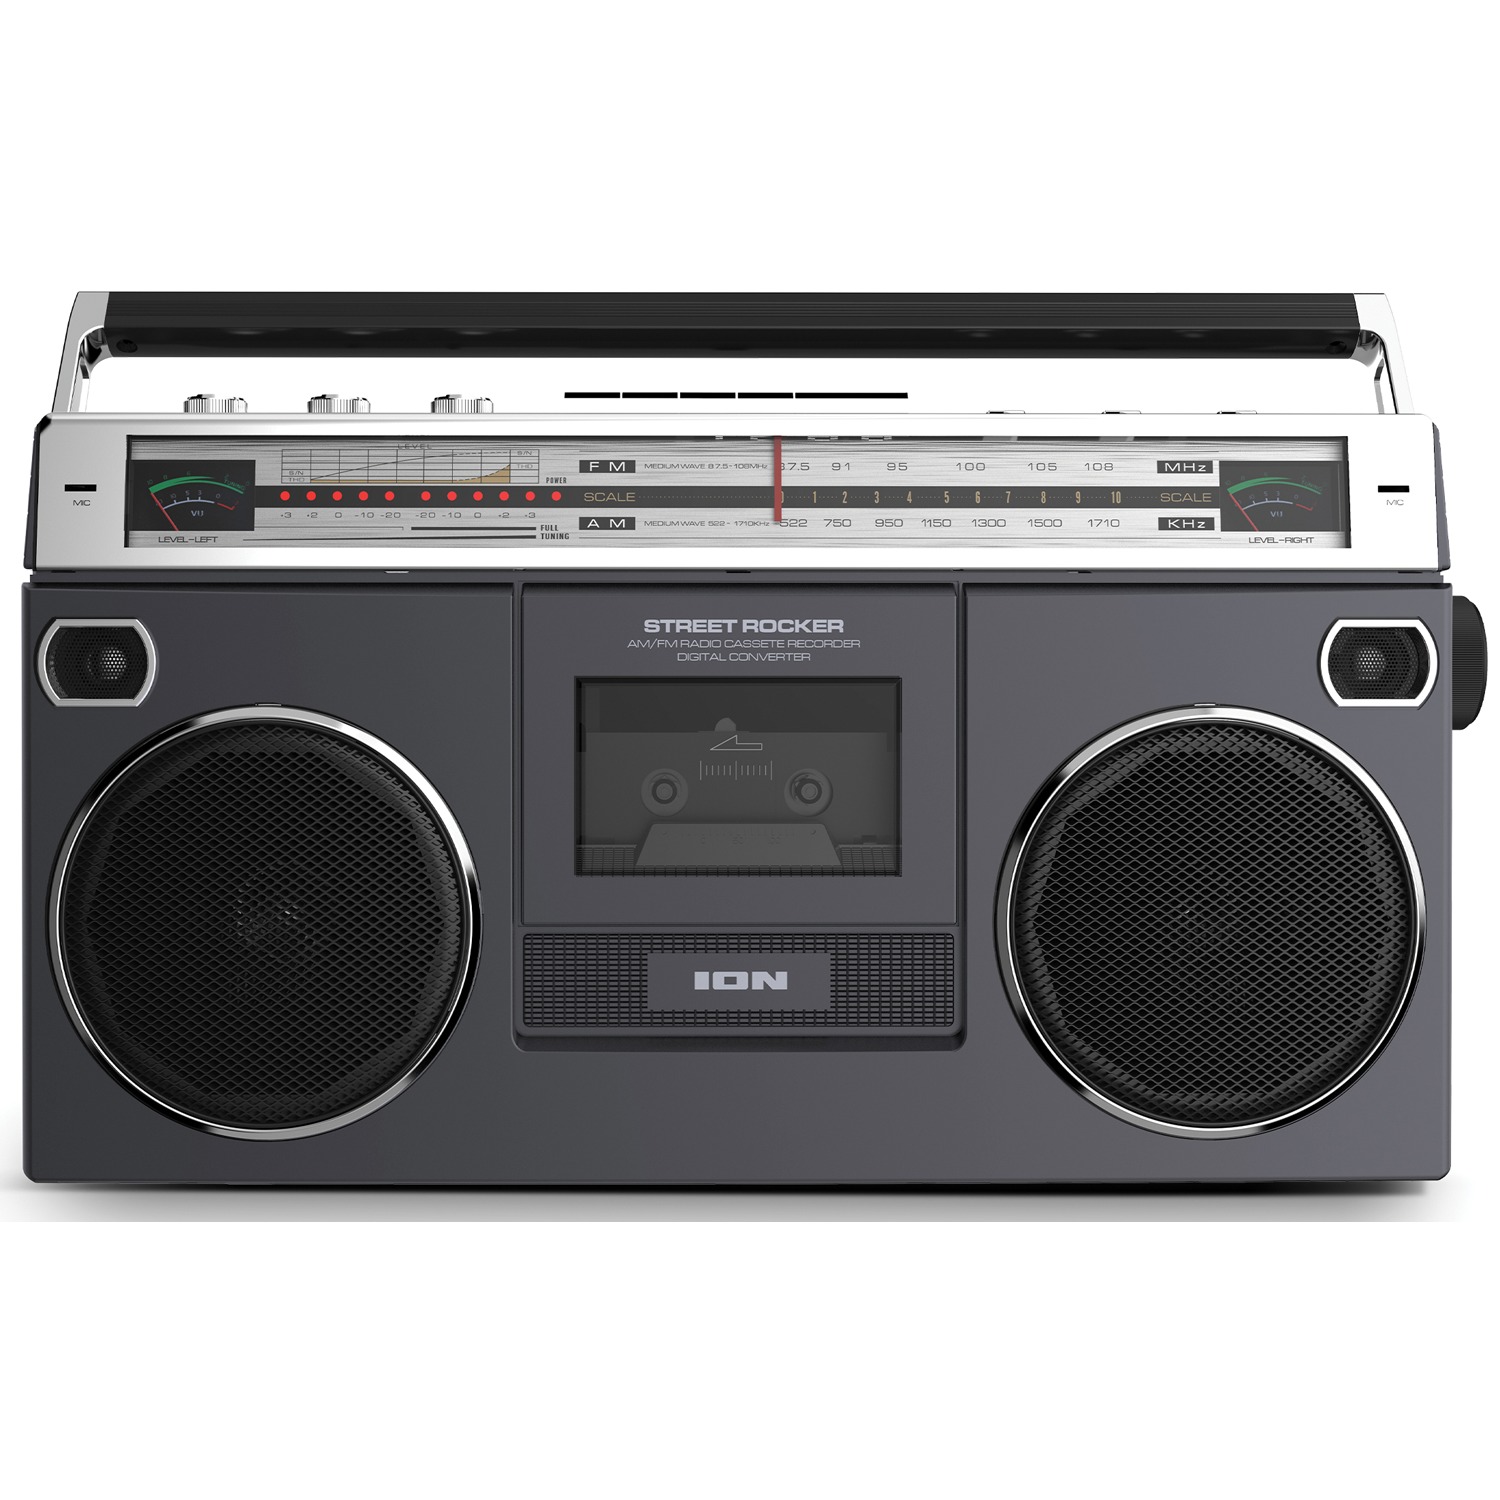 ION Audio Street Rocker Black - Portable Retro-Style Stereo Boombox with Wireless Streaming - image 2 of 2